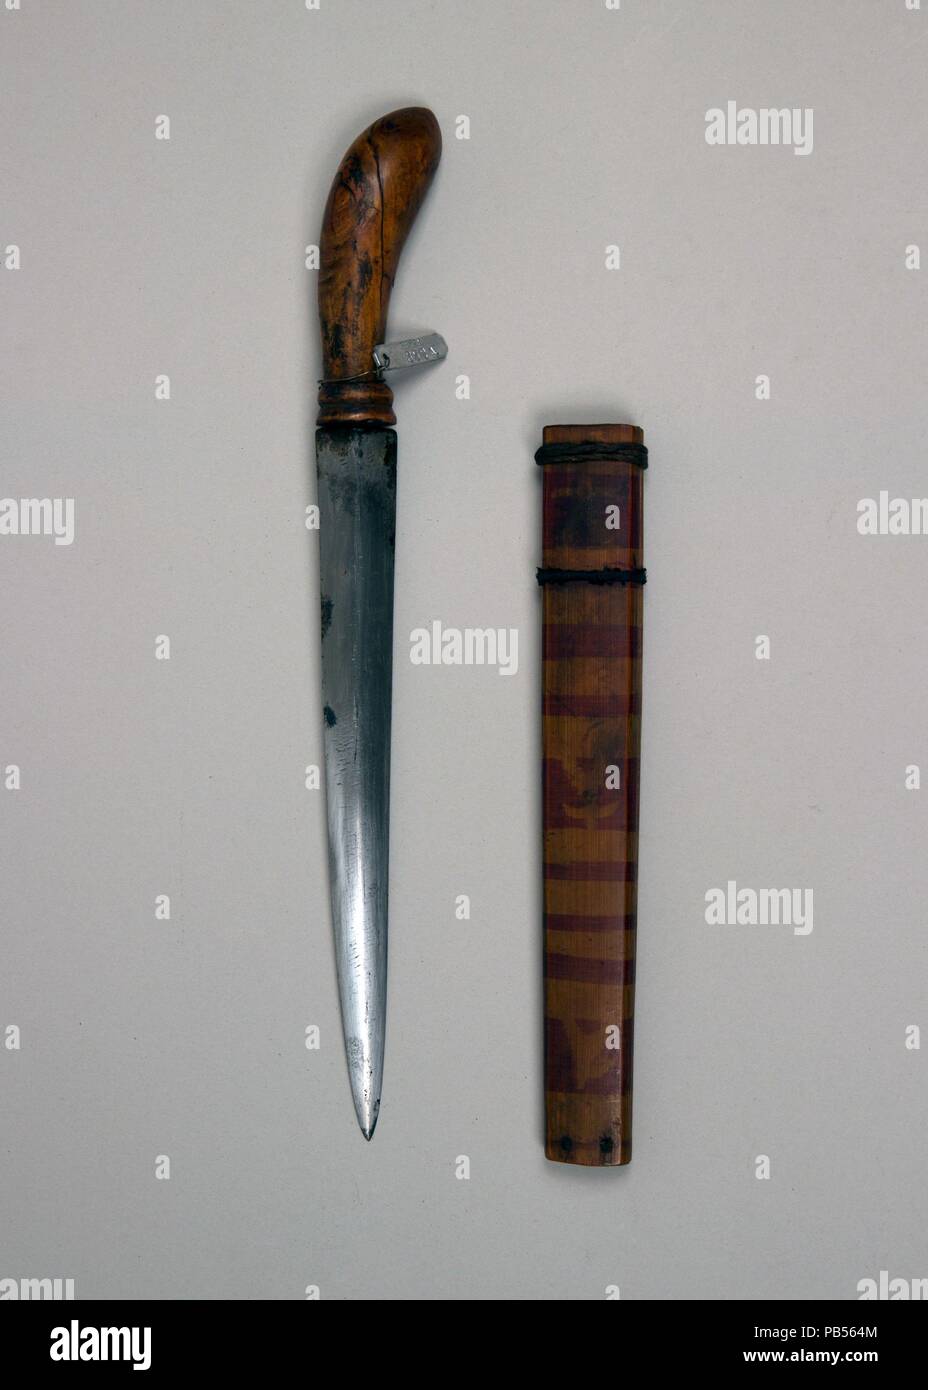 Dagger with Sheath. Culture: Philippine, Mindanao. Dimensions: L. with sheath 11 1/8 in. (28.3 cm); L. without sheath 11 in. (27.9 cm); L. of blade 7 1/2 in. (19.1 cm); W. 1 in. (2.5 cm); Wt. 3.4 oz. (96.4 g); Wt. of sheath 1.4 oz. (39.7 g). Date: 18th-19th century. Museum: Metropolitan Museum of Art, New York, USA. Stock Photo